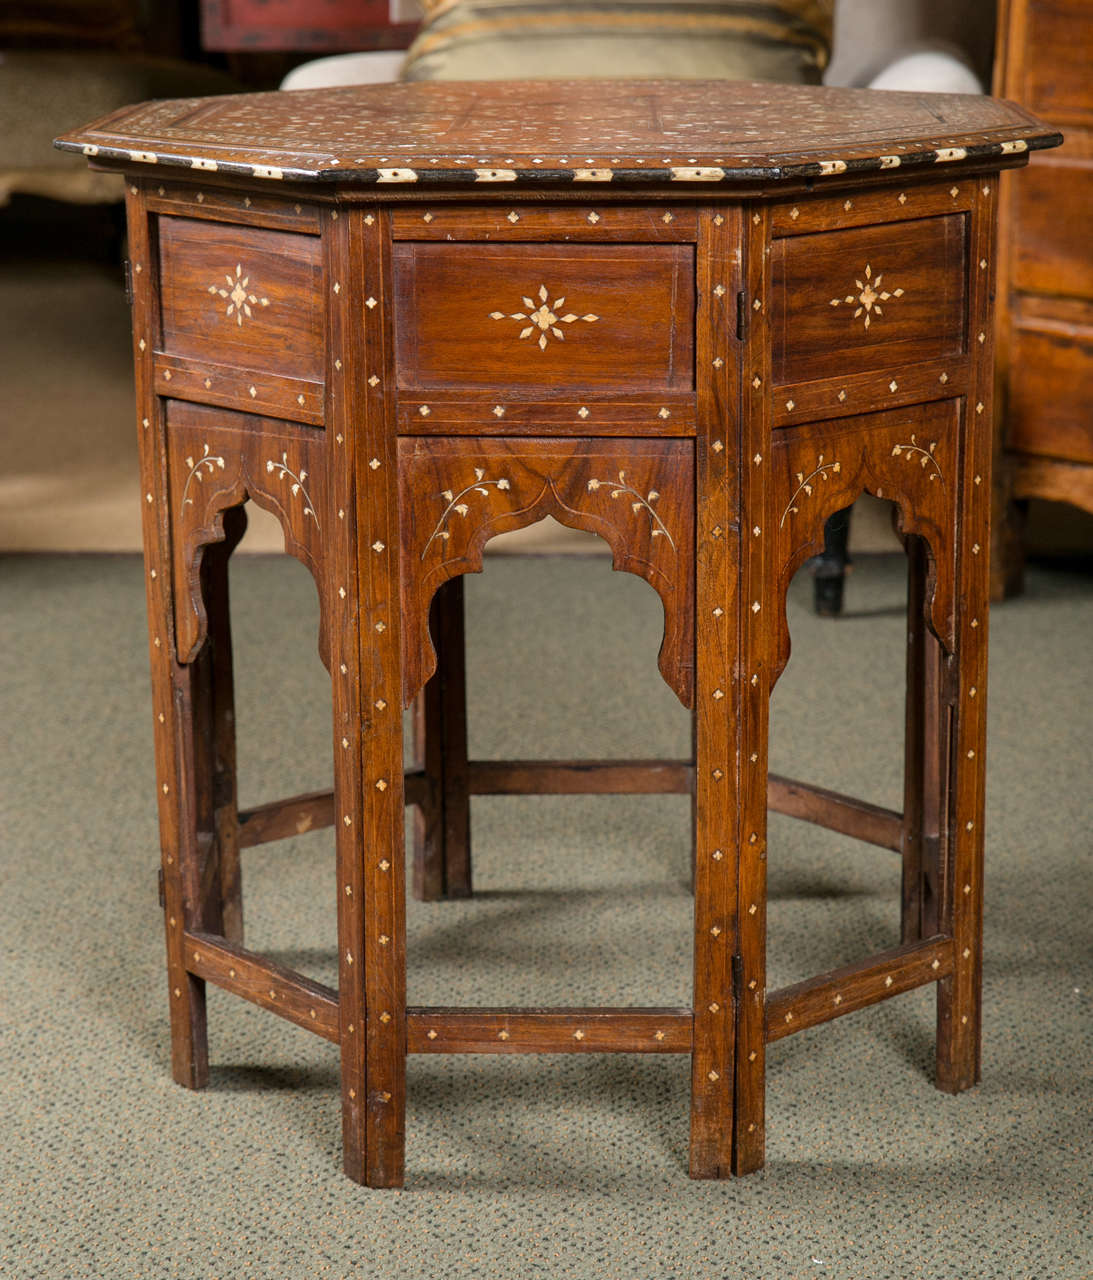 An octagonal Indian side table of hardwood with bone and ebony inlay.